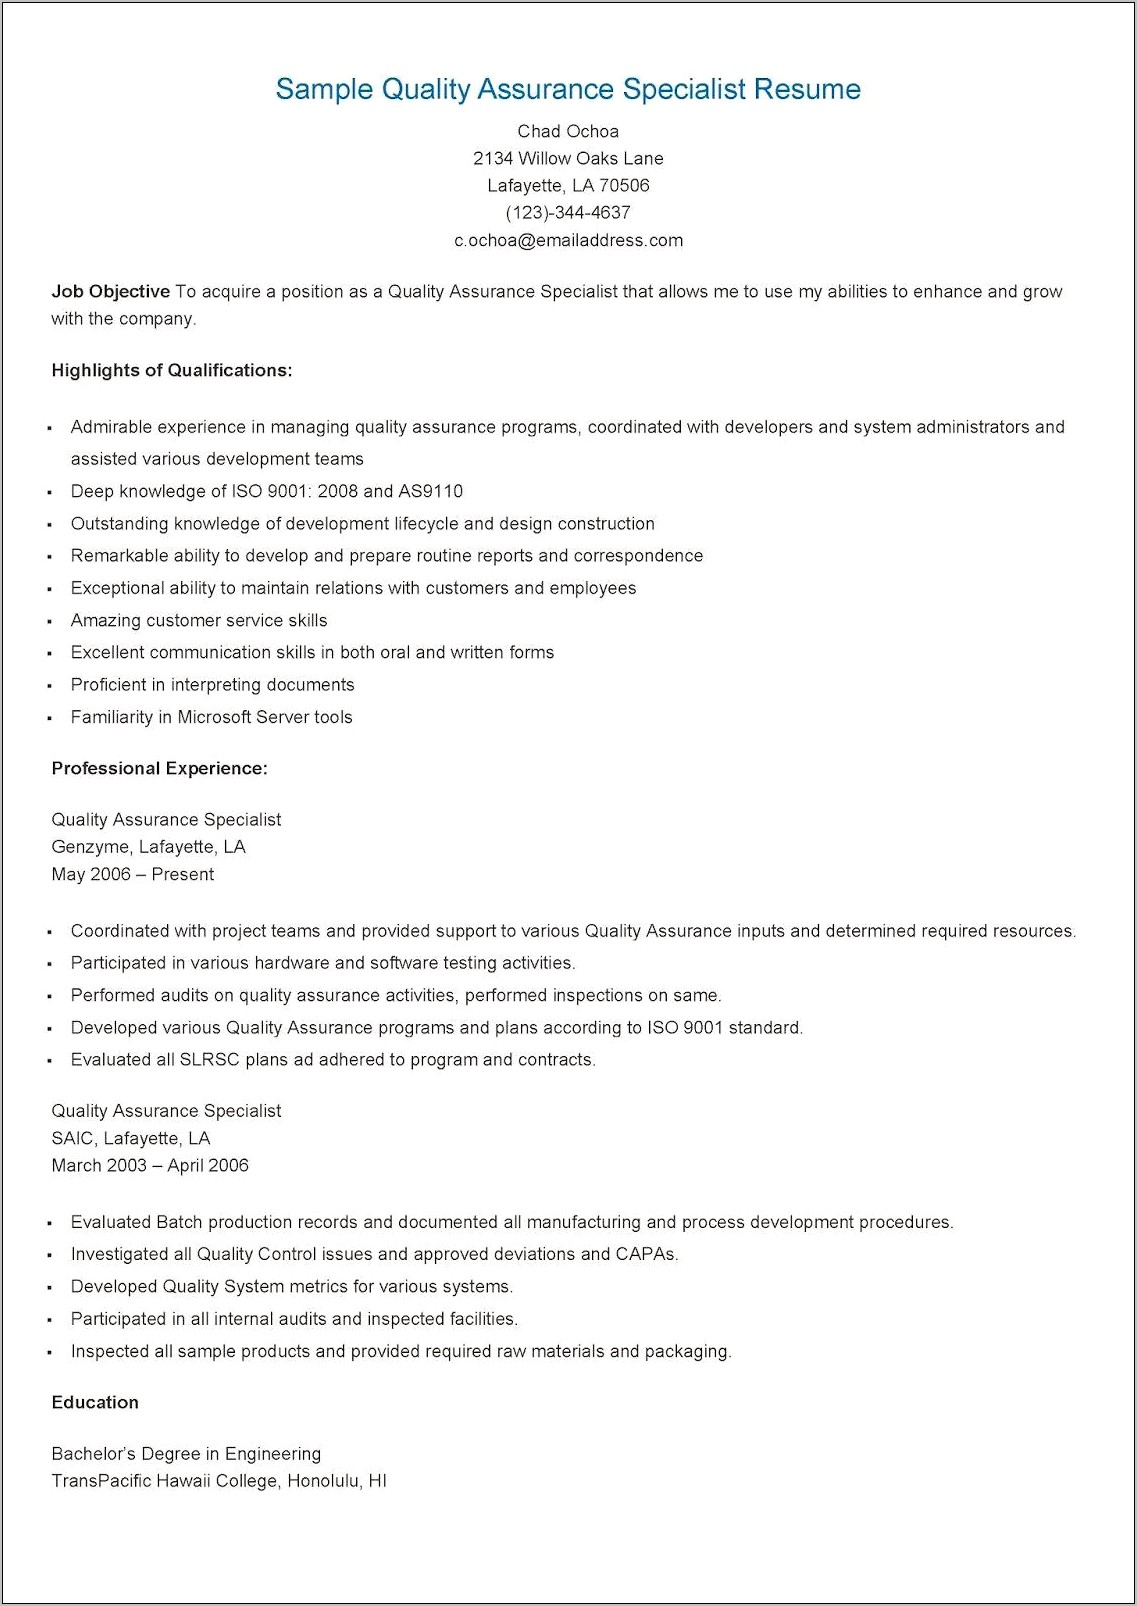 Air Quality Specialist Resume Sample